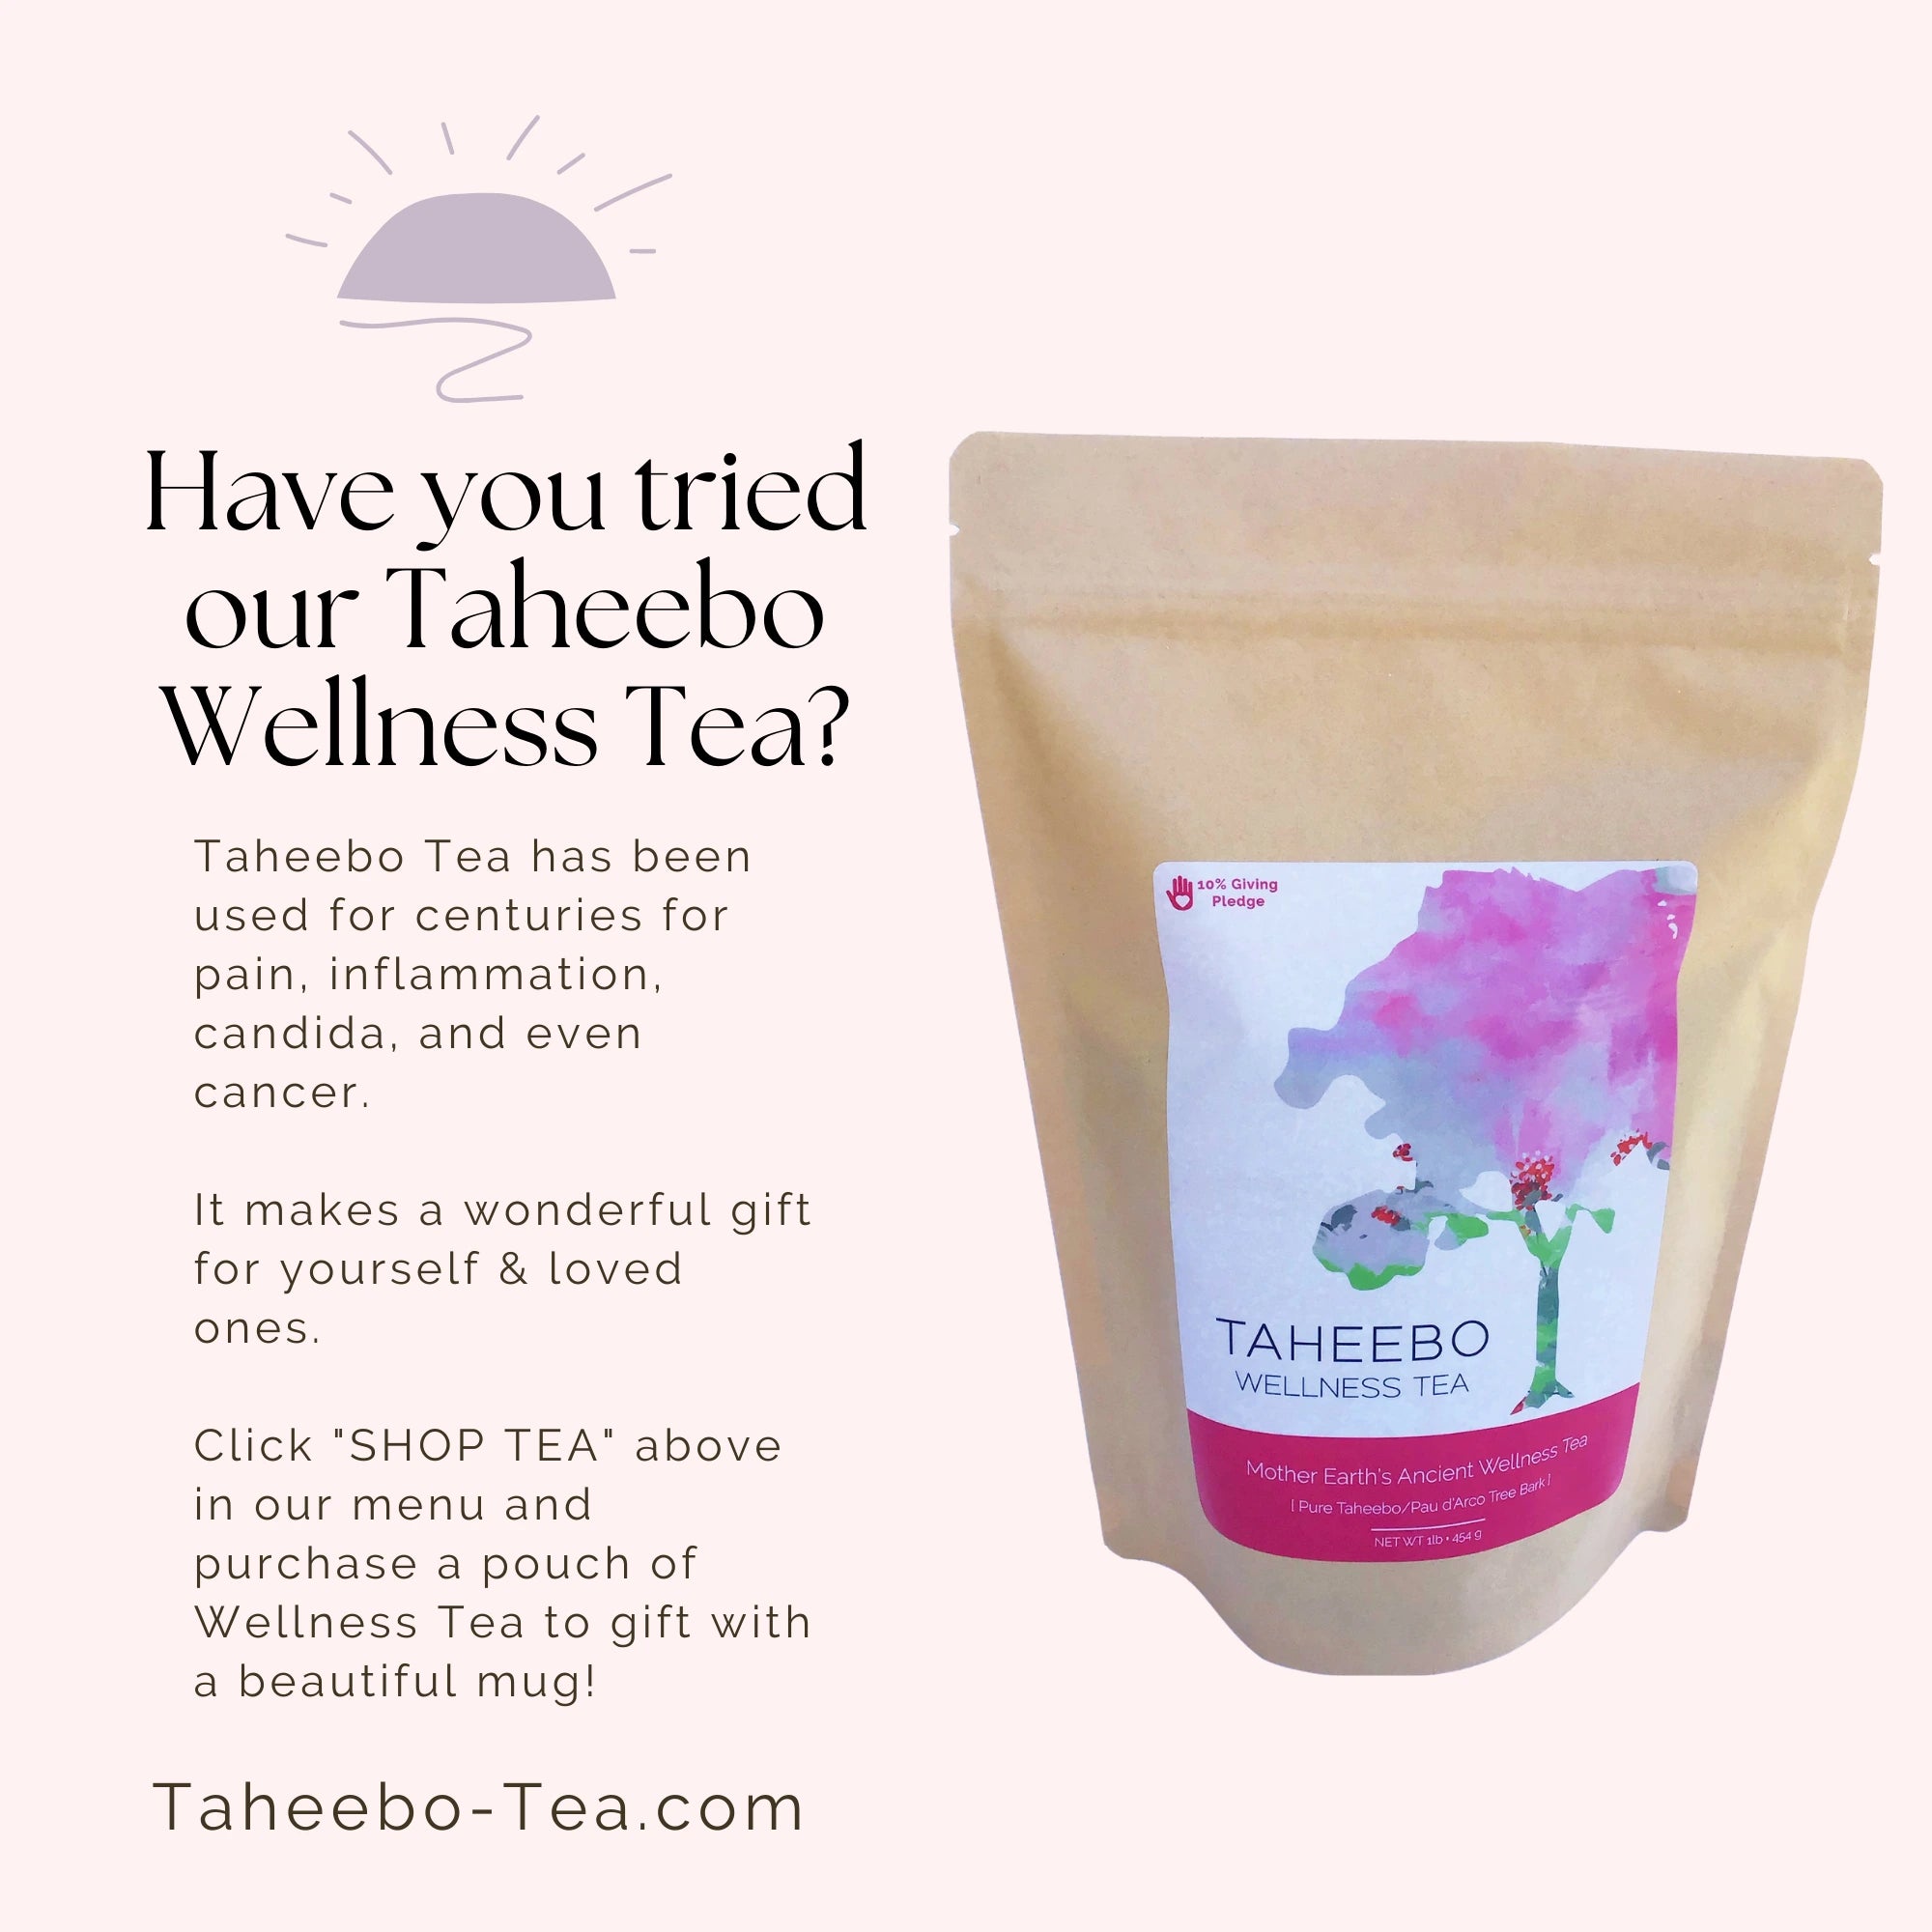 Have you treid our Taheebo Wellness Tea? It would go great with your new mug!